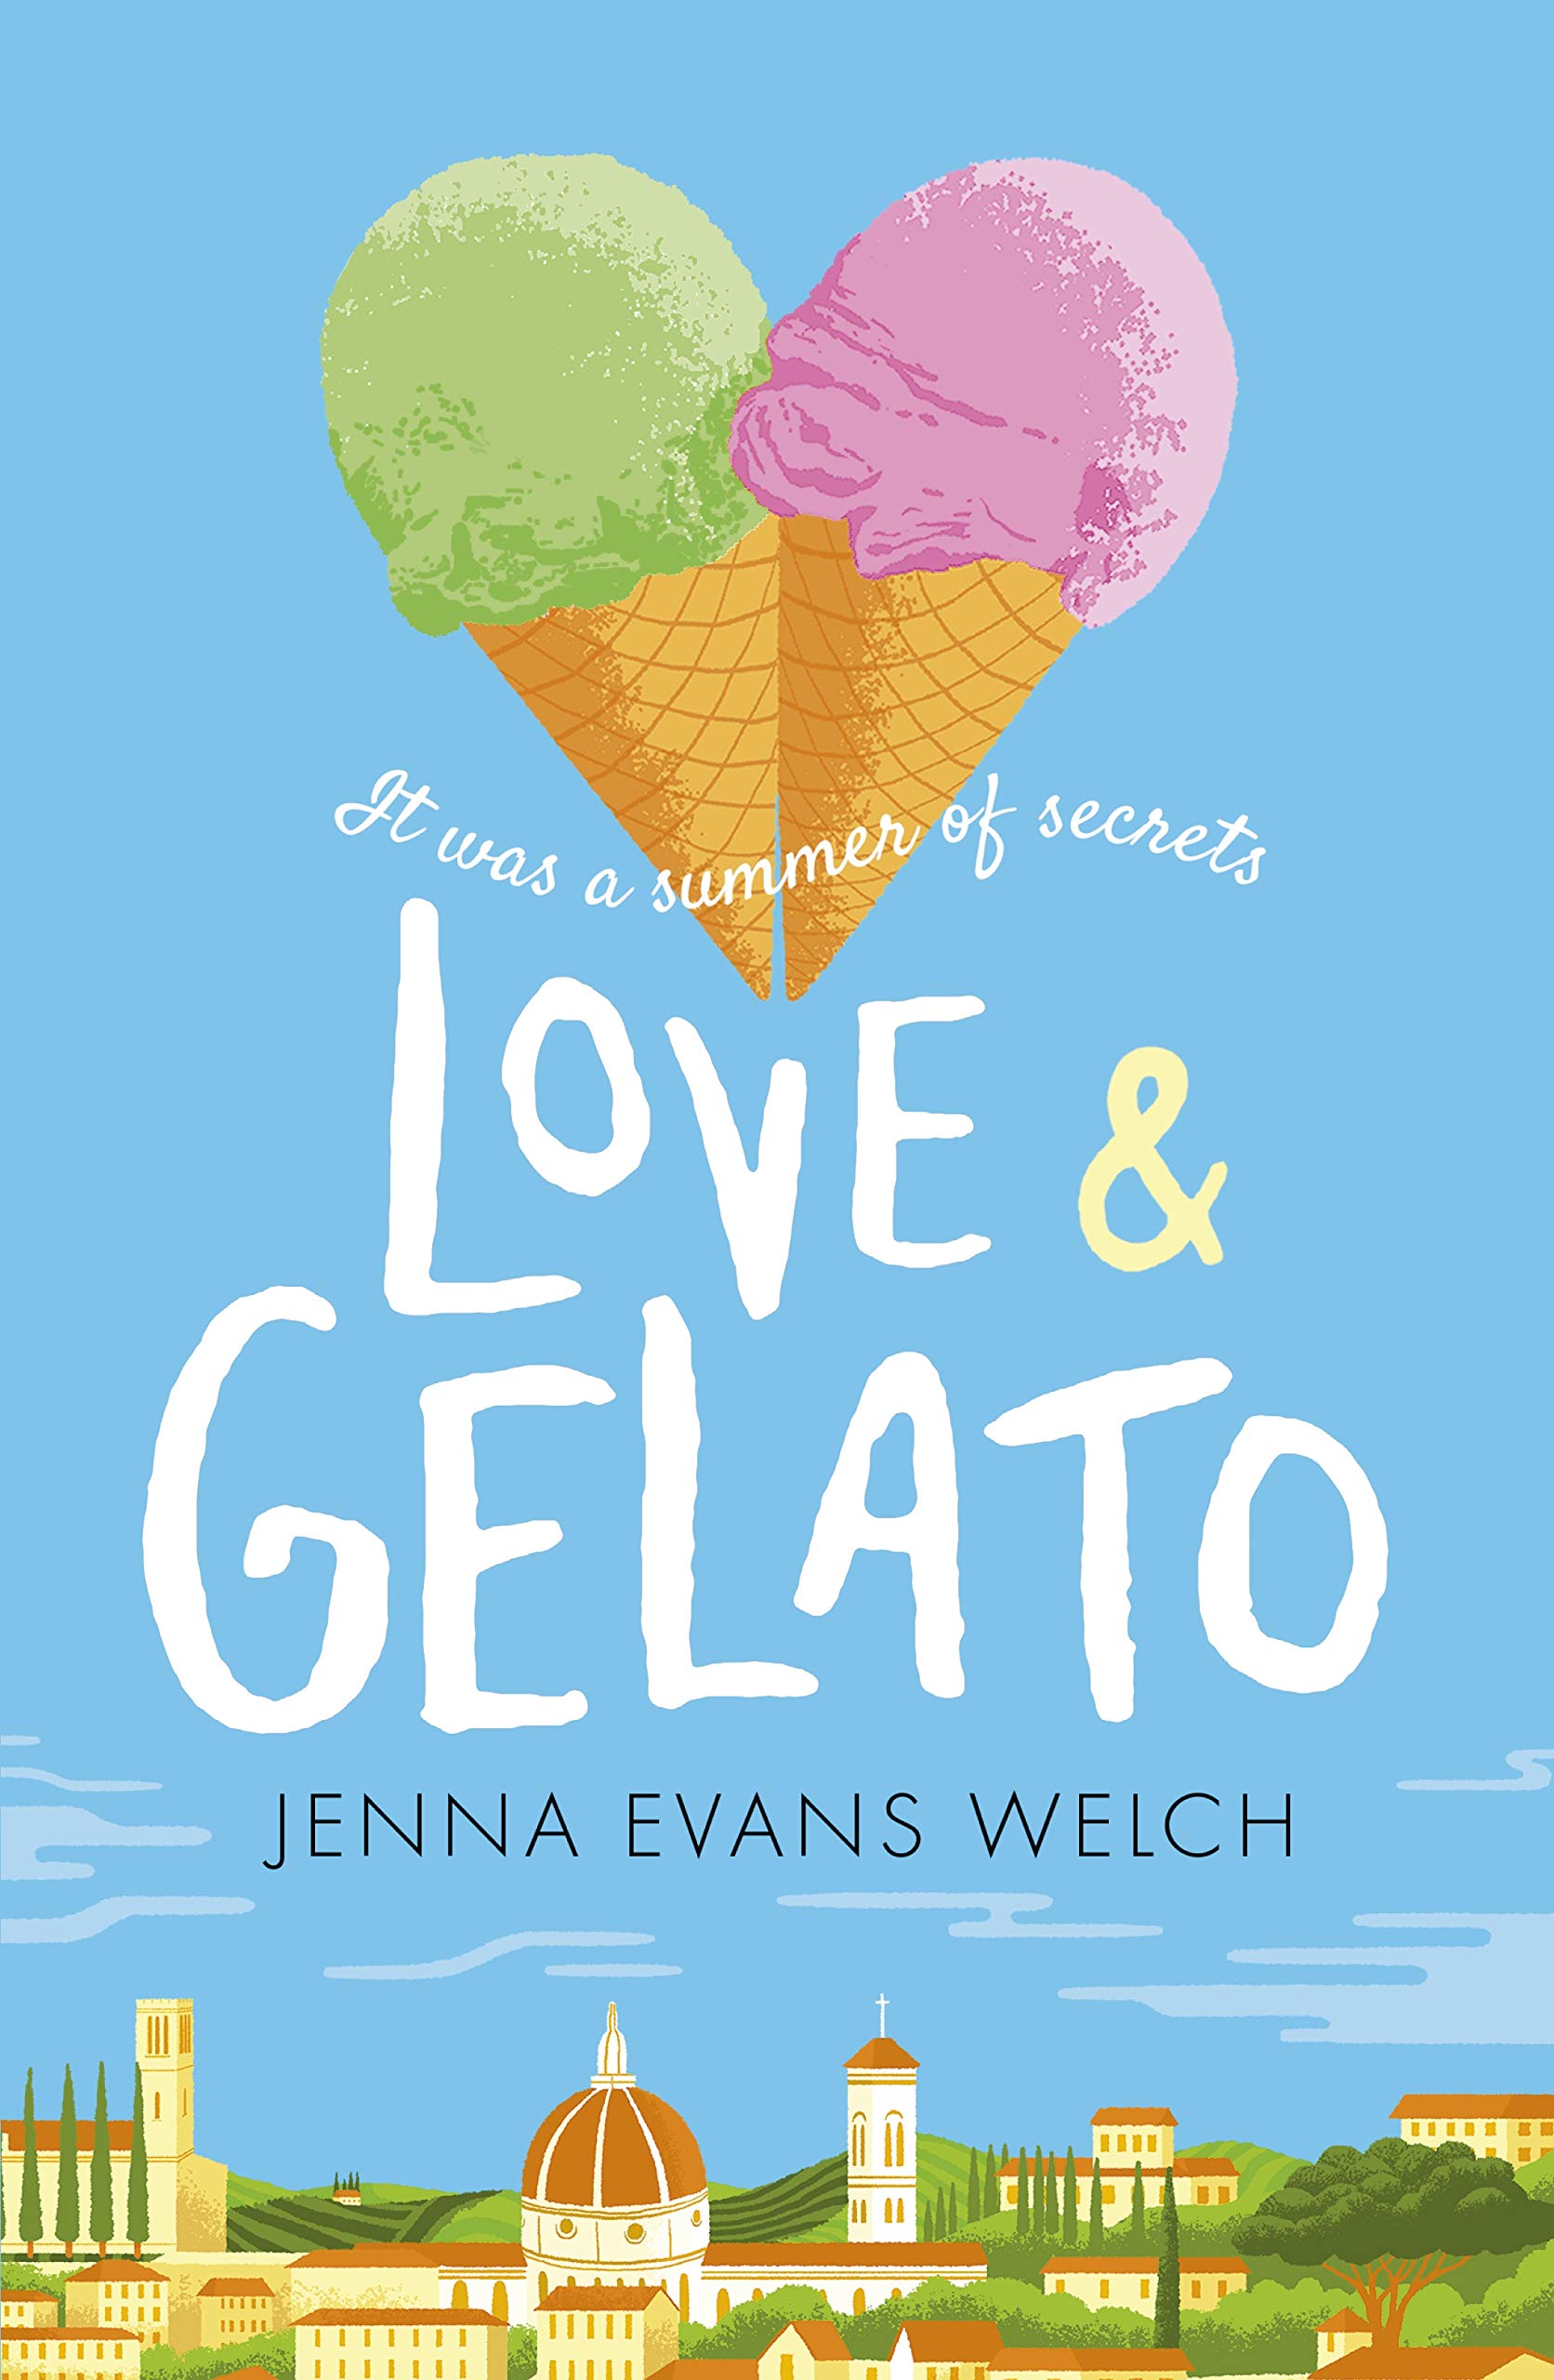 book review love and gelato